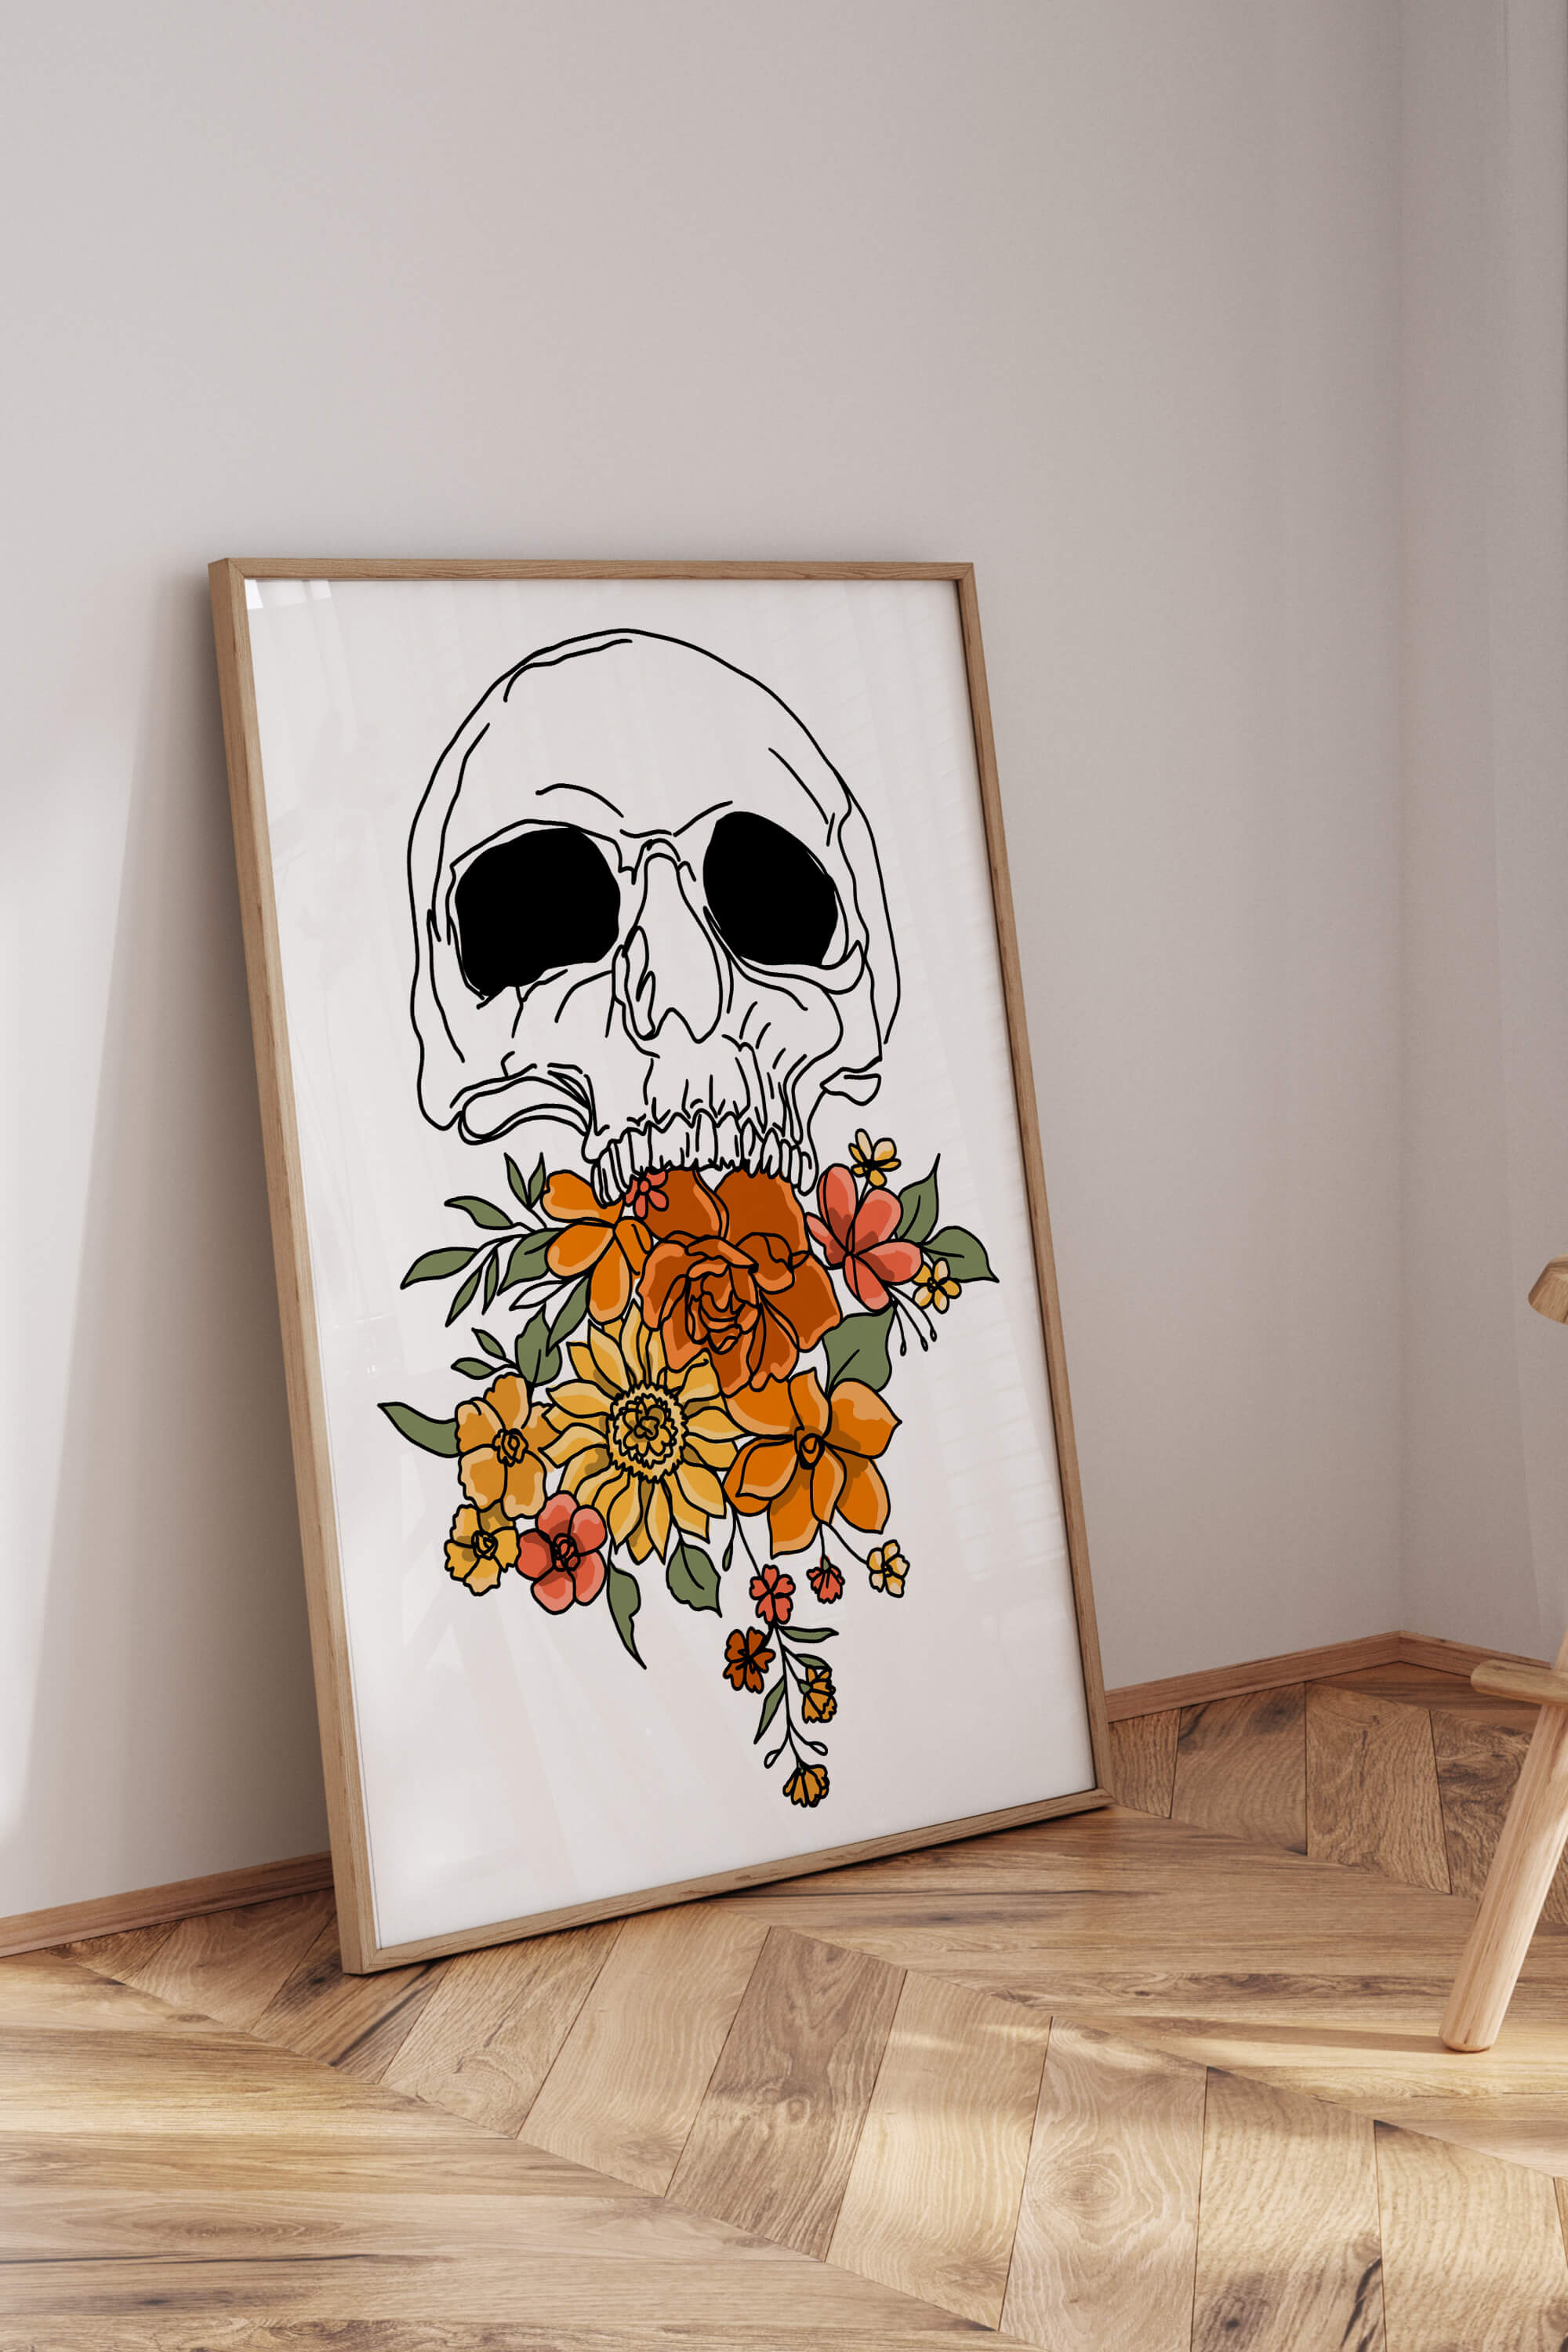 Artistic Gothic Floral Skull depiction in monochrome, ideal for creating a statement in home or office spaces.